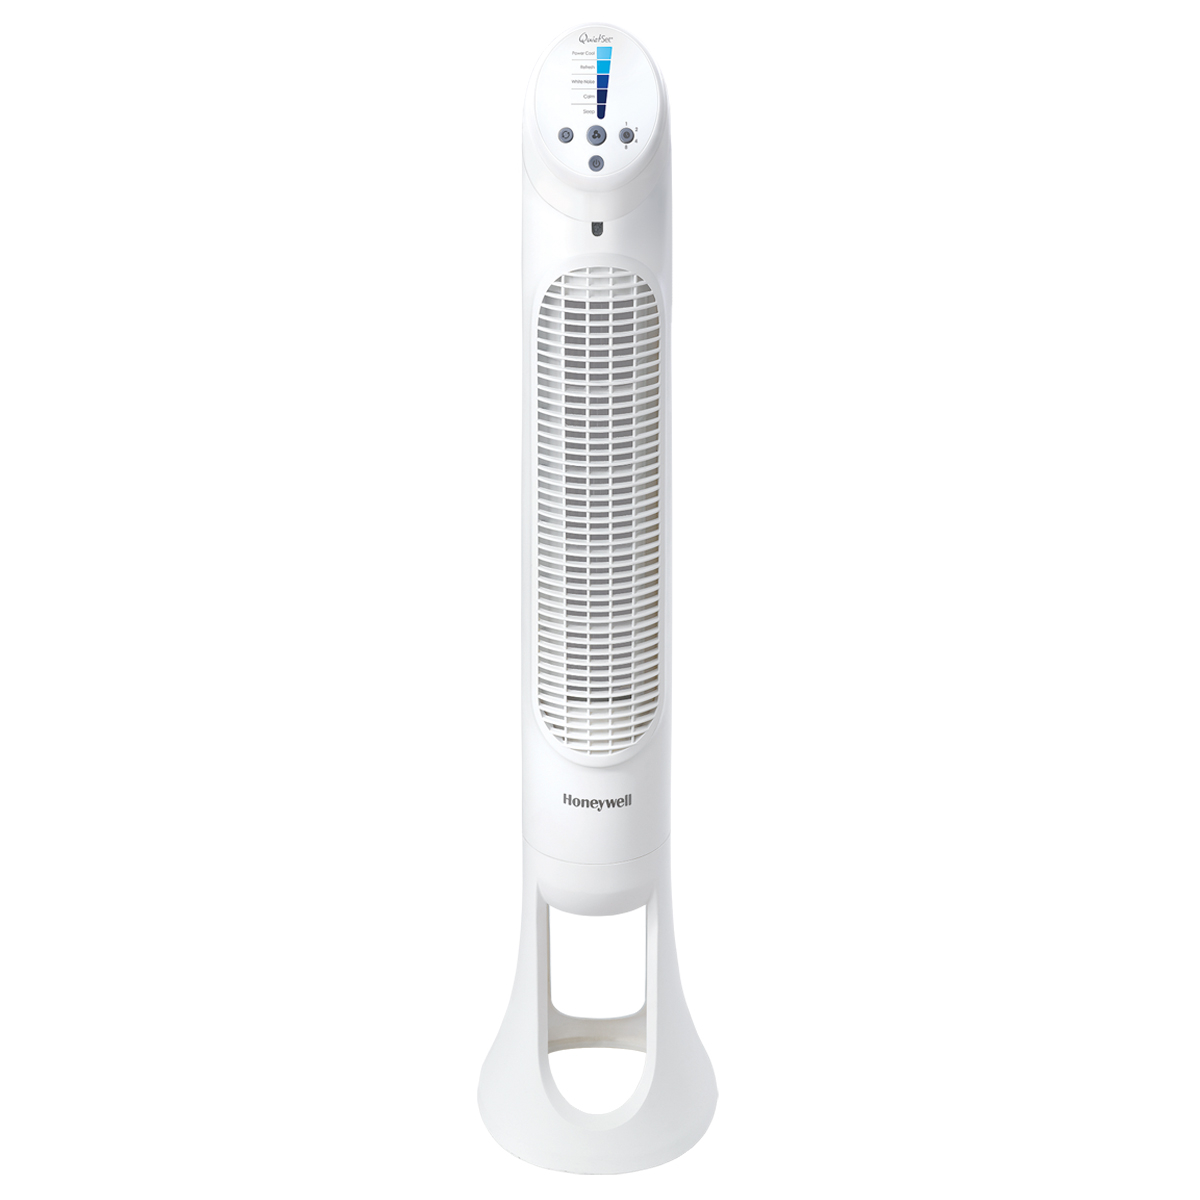 Honeywell Quietset Whole Room Tower Fan White Hyf260w with regard to proportions 1200 X 1200